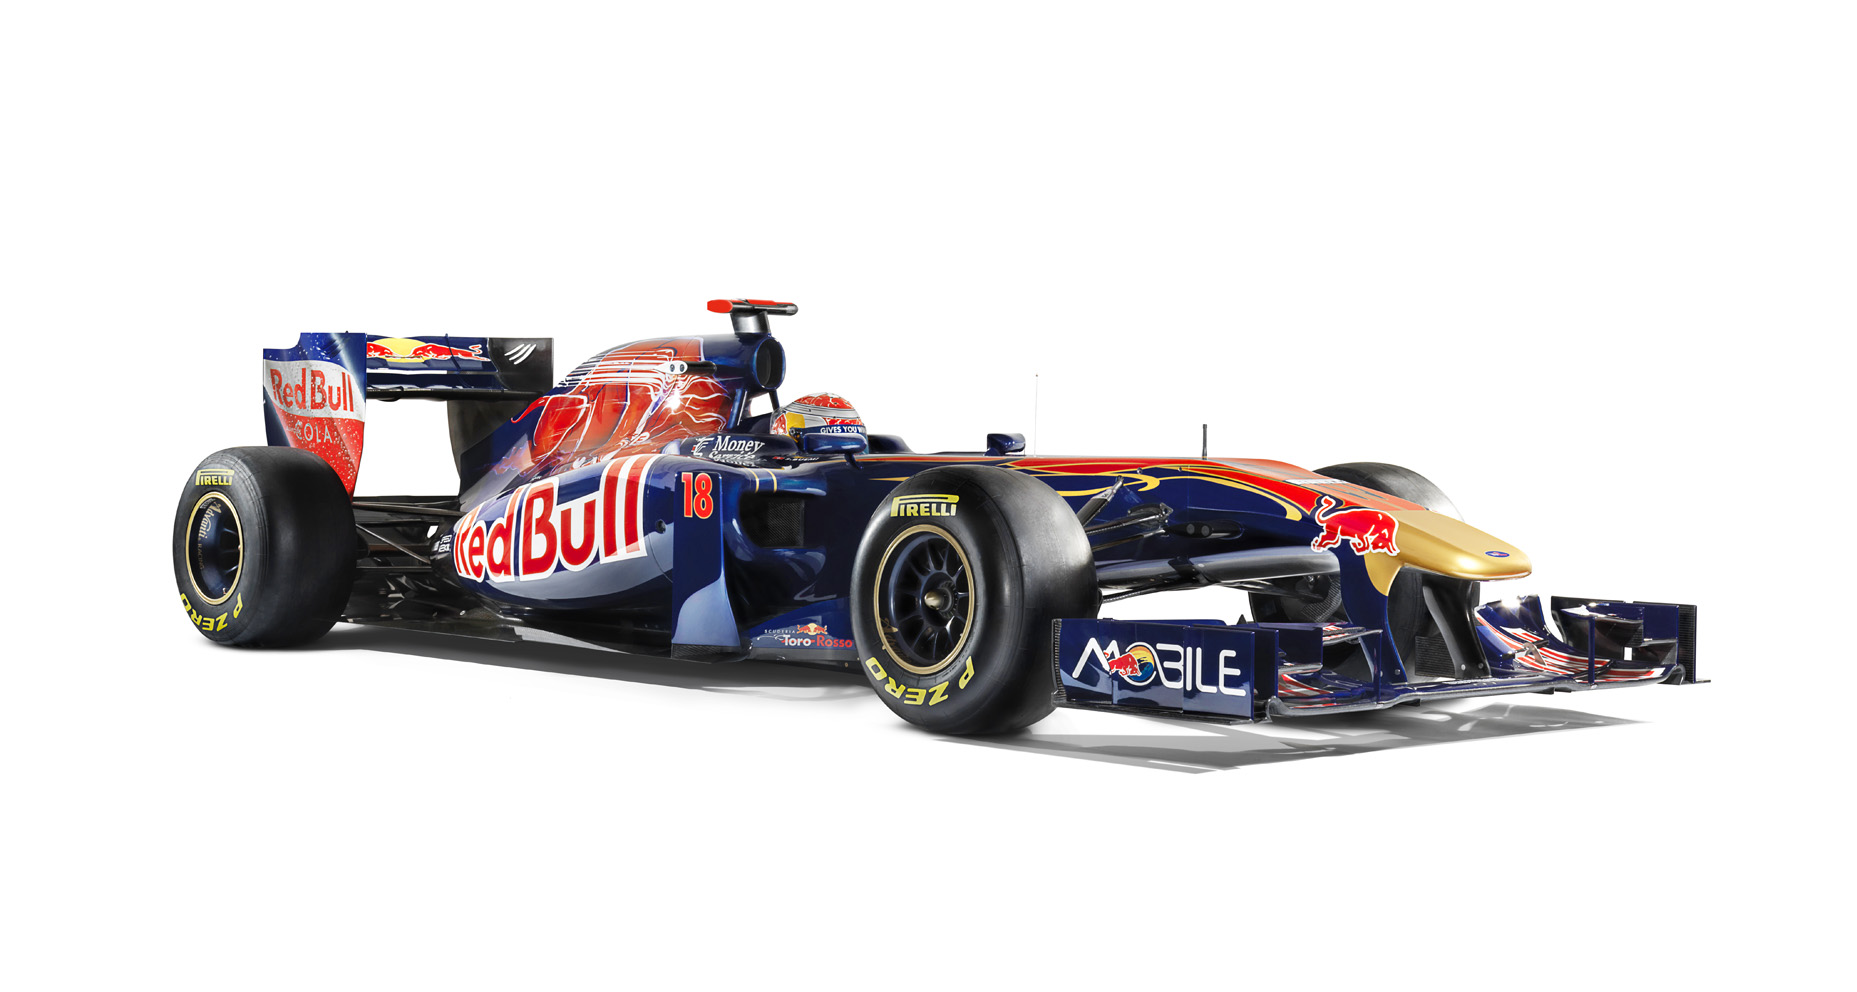 Media pack image of the Toro Rosso F1 Car